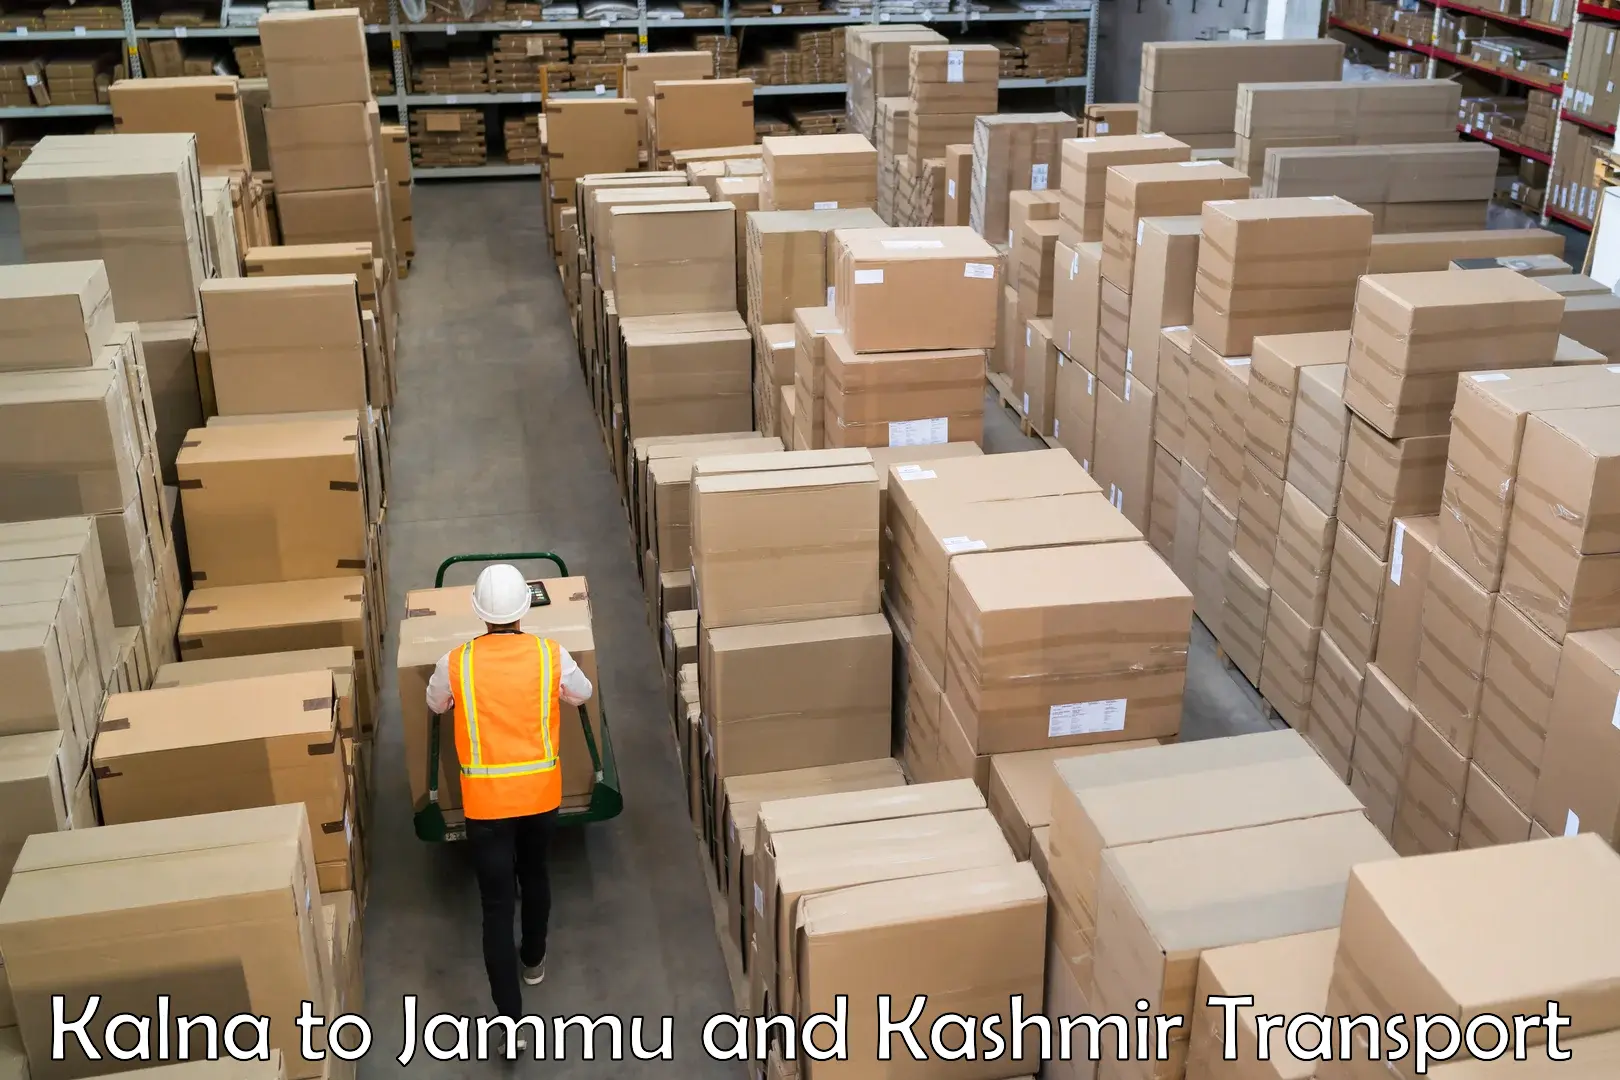 Air freight transport services Kalna to Pulwama